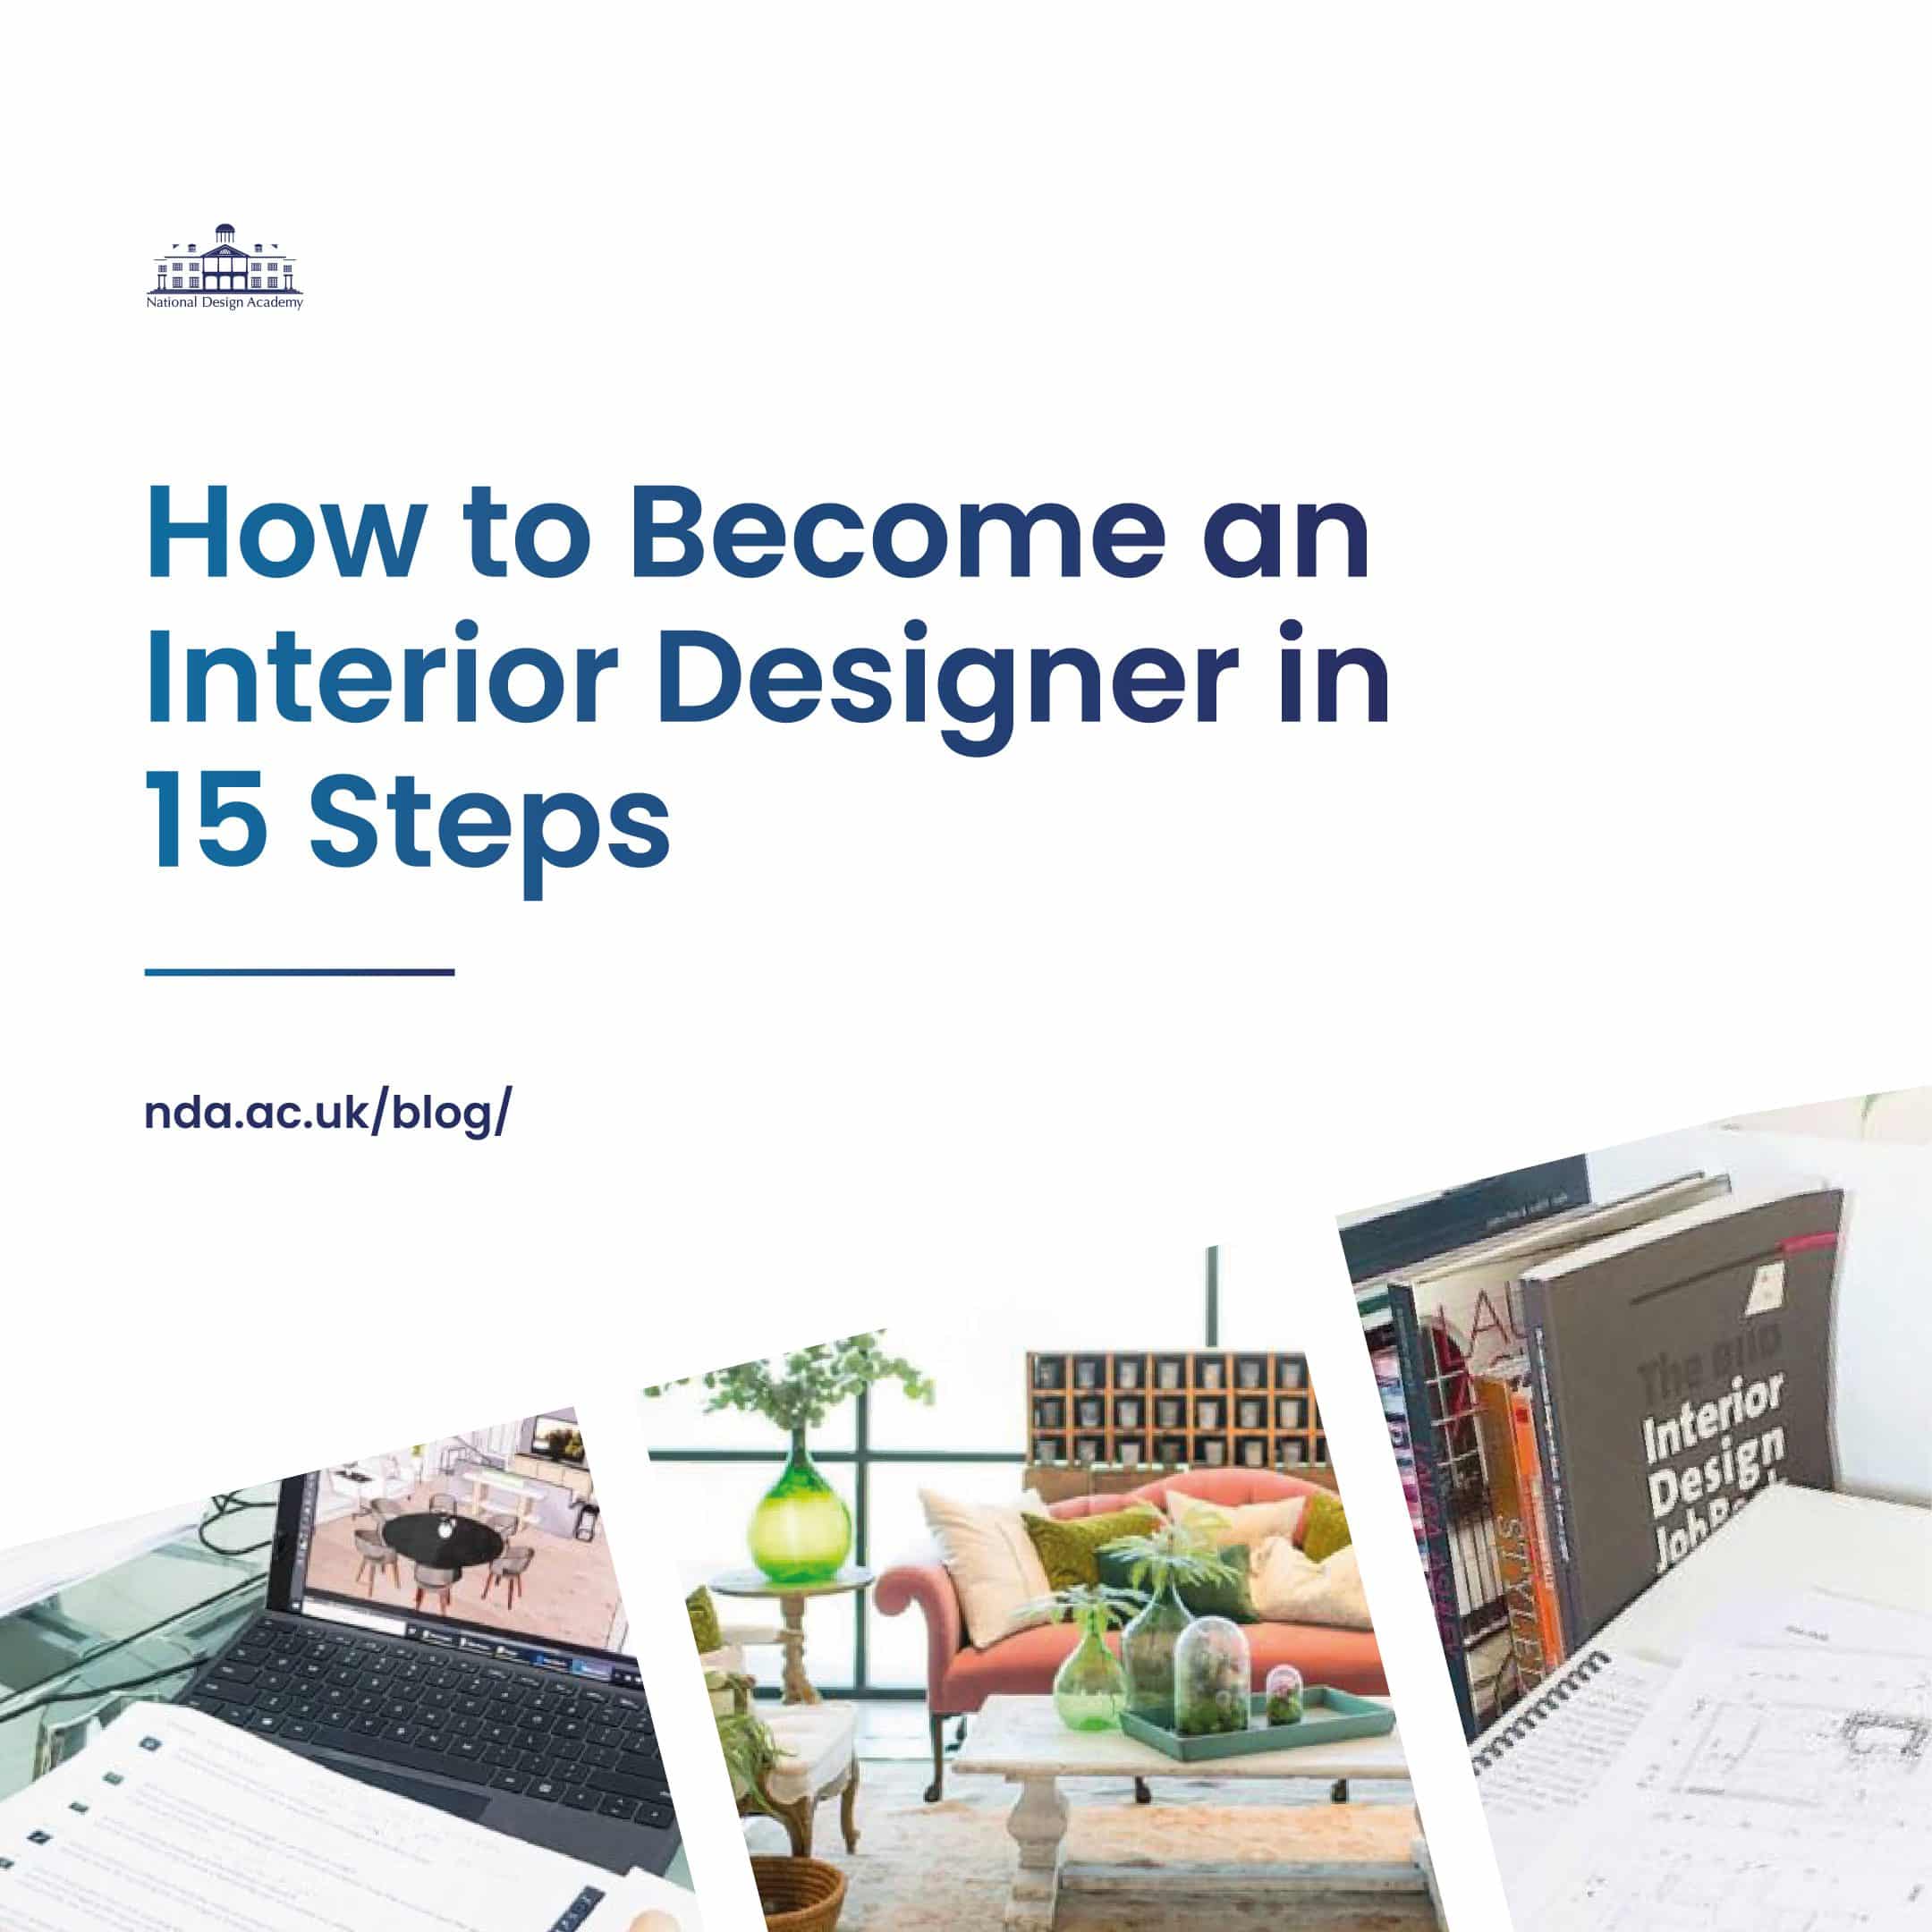 How to Become an Interior Designer in 15 Simple Steps